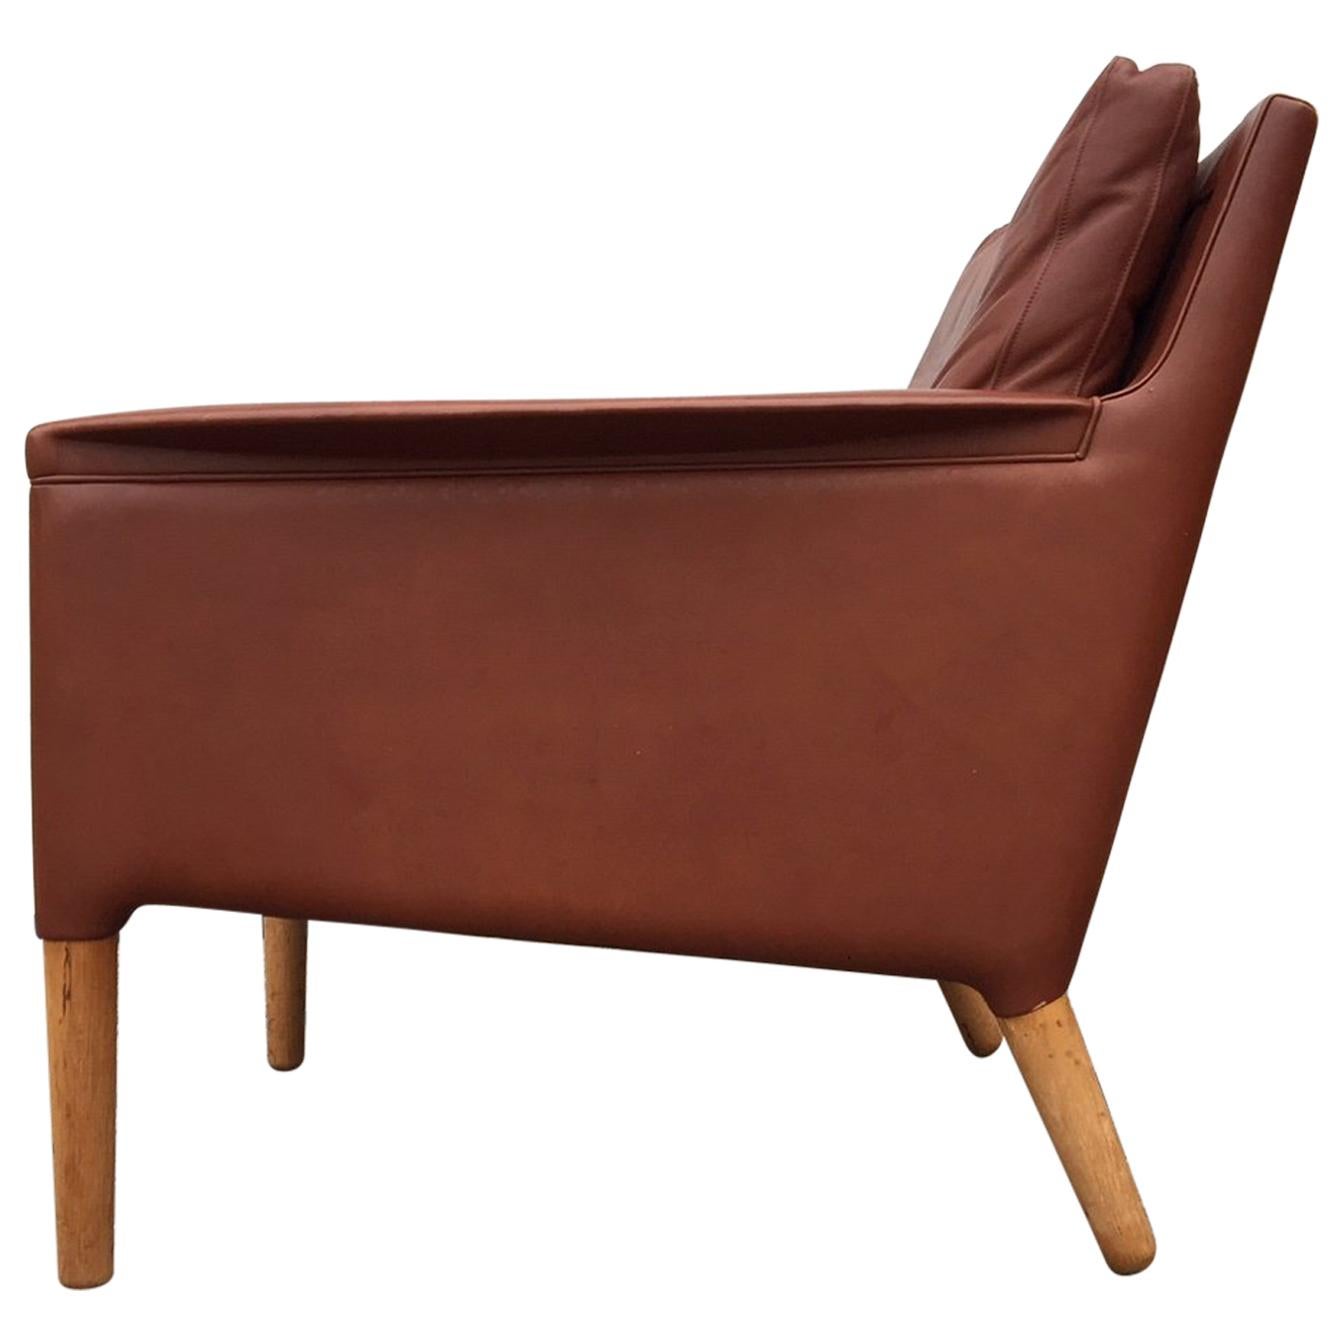 Danish Modern Lounge Chair in Cognac Tanned Leather, Model 55 by Kurt Østervig